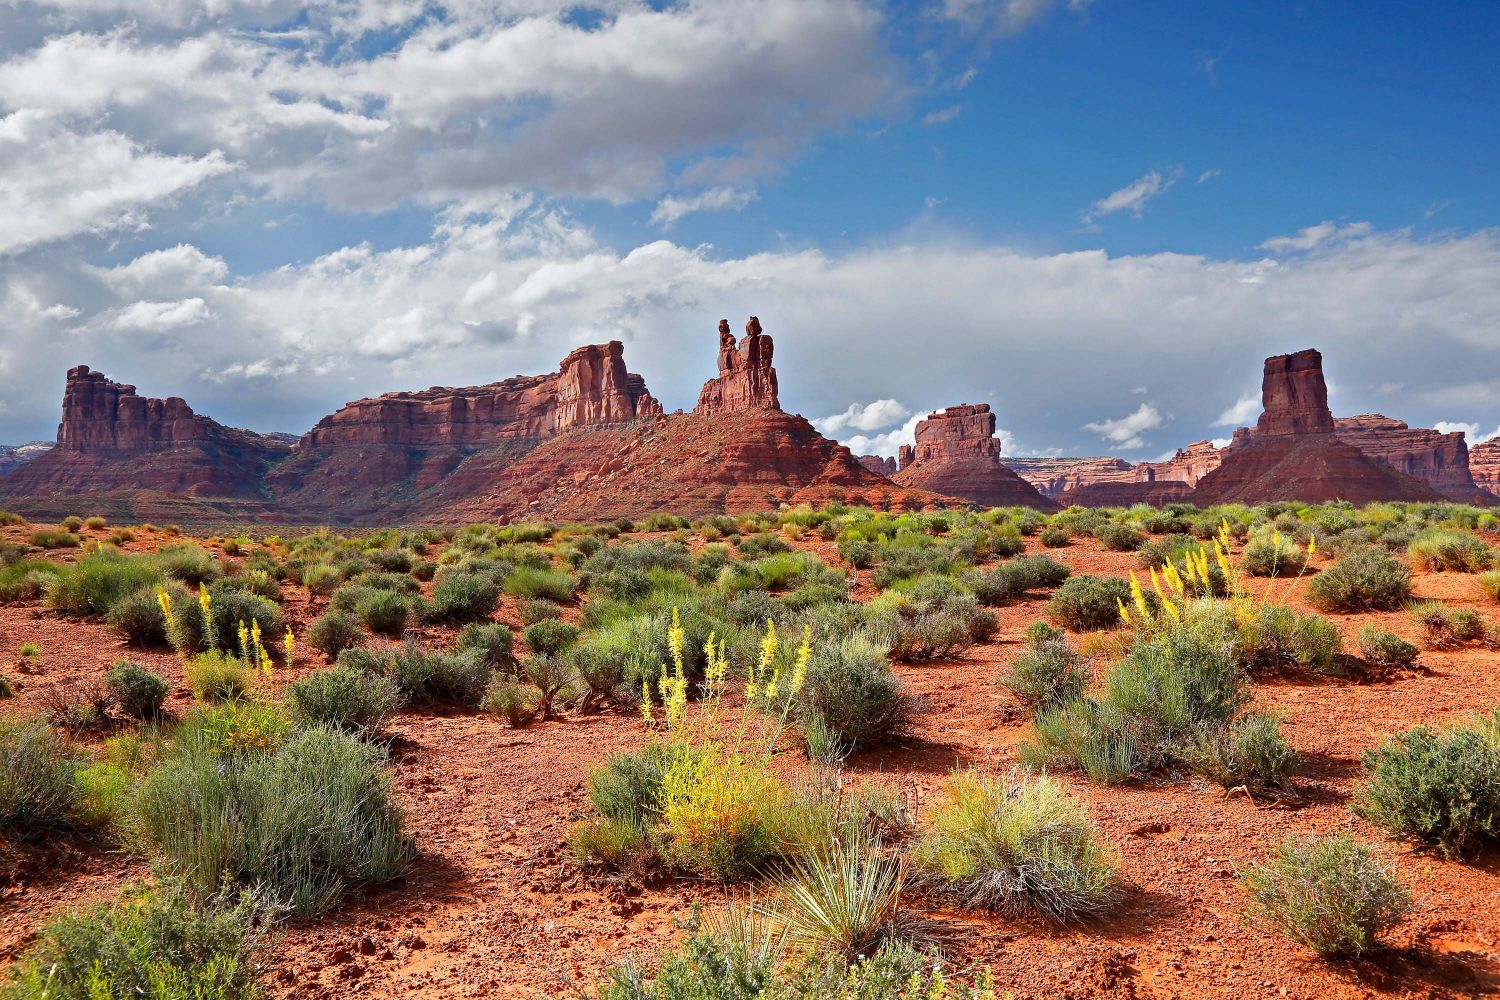 Valley of the Gods a scenic sandstone valley near Mexican Hat Utah.